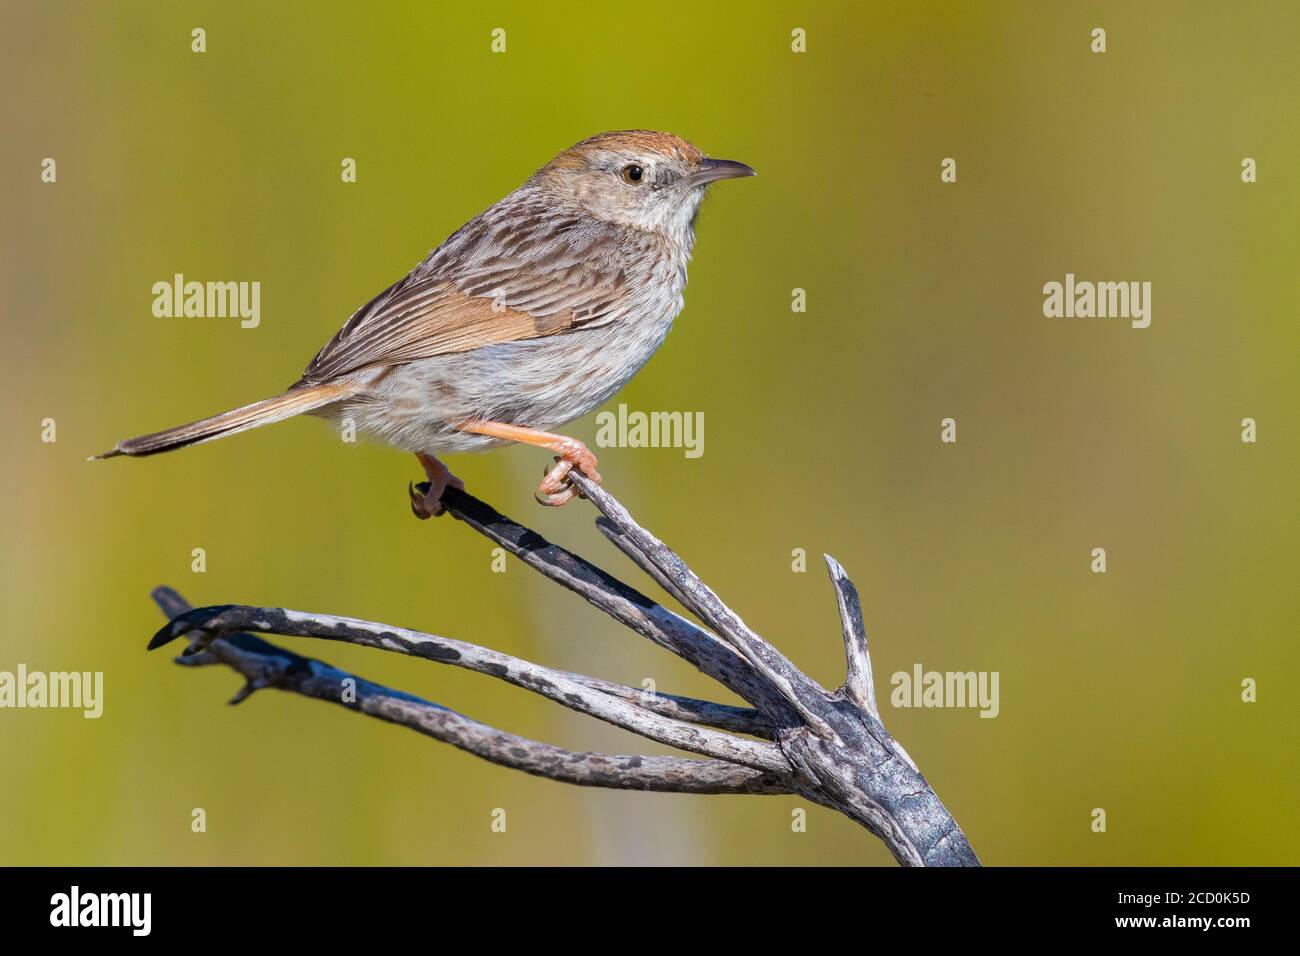 Grey-backed Cisticola Cisticola subruficapilla), adult perched on a branch, Western Cape, South Africa Stock Photo